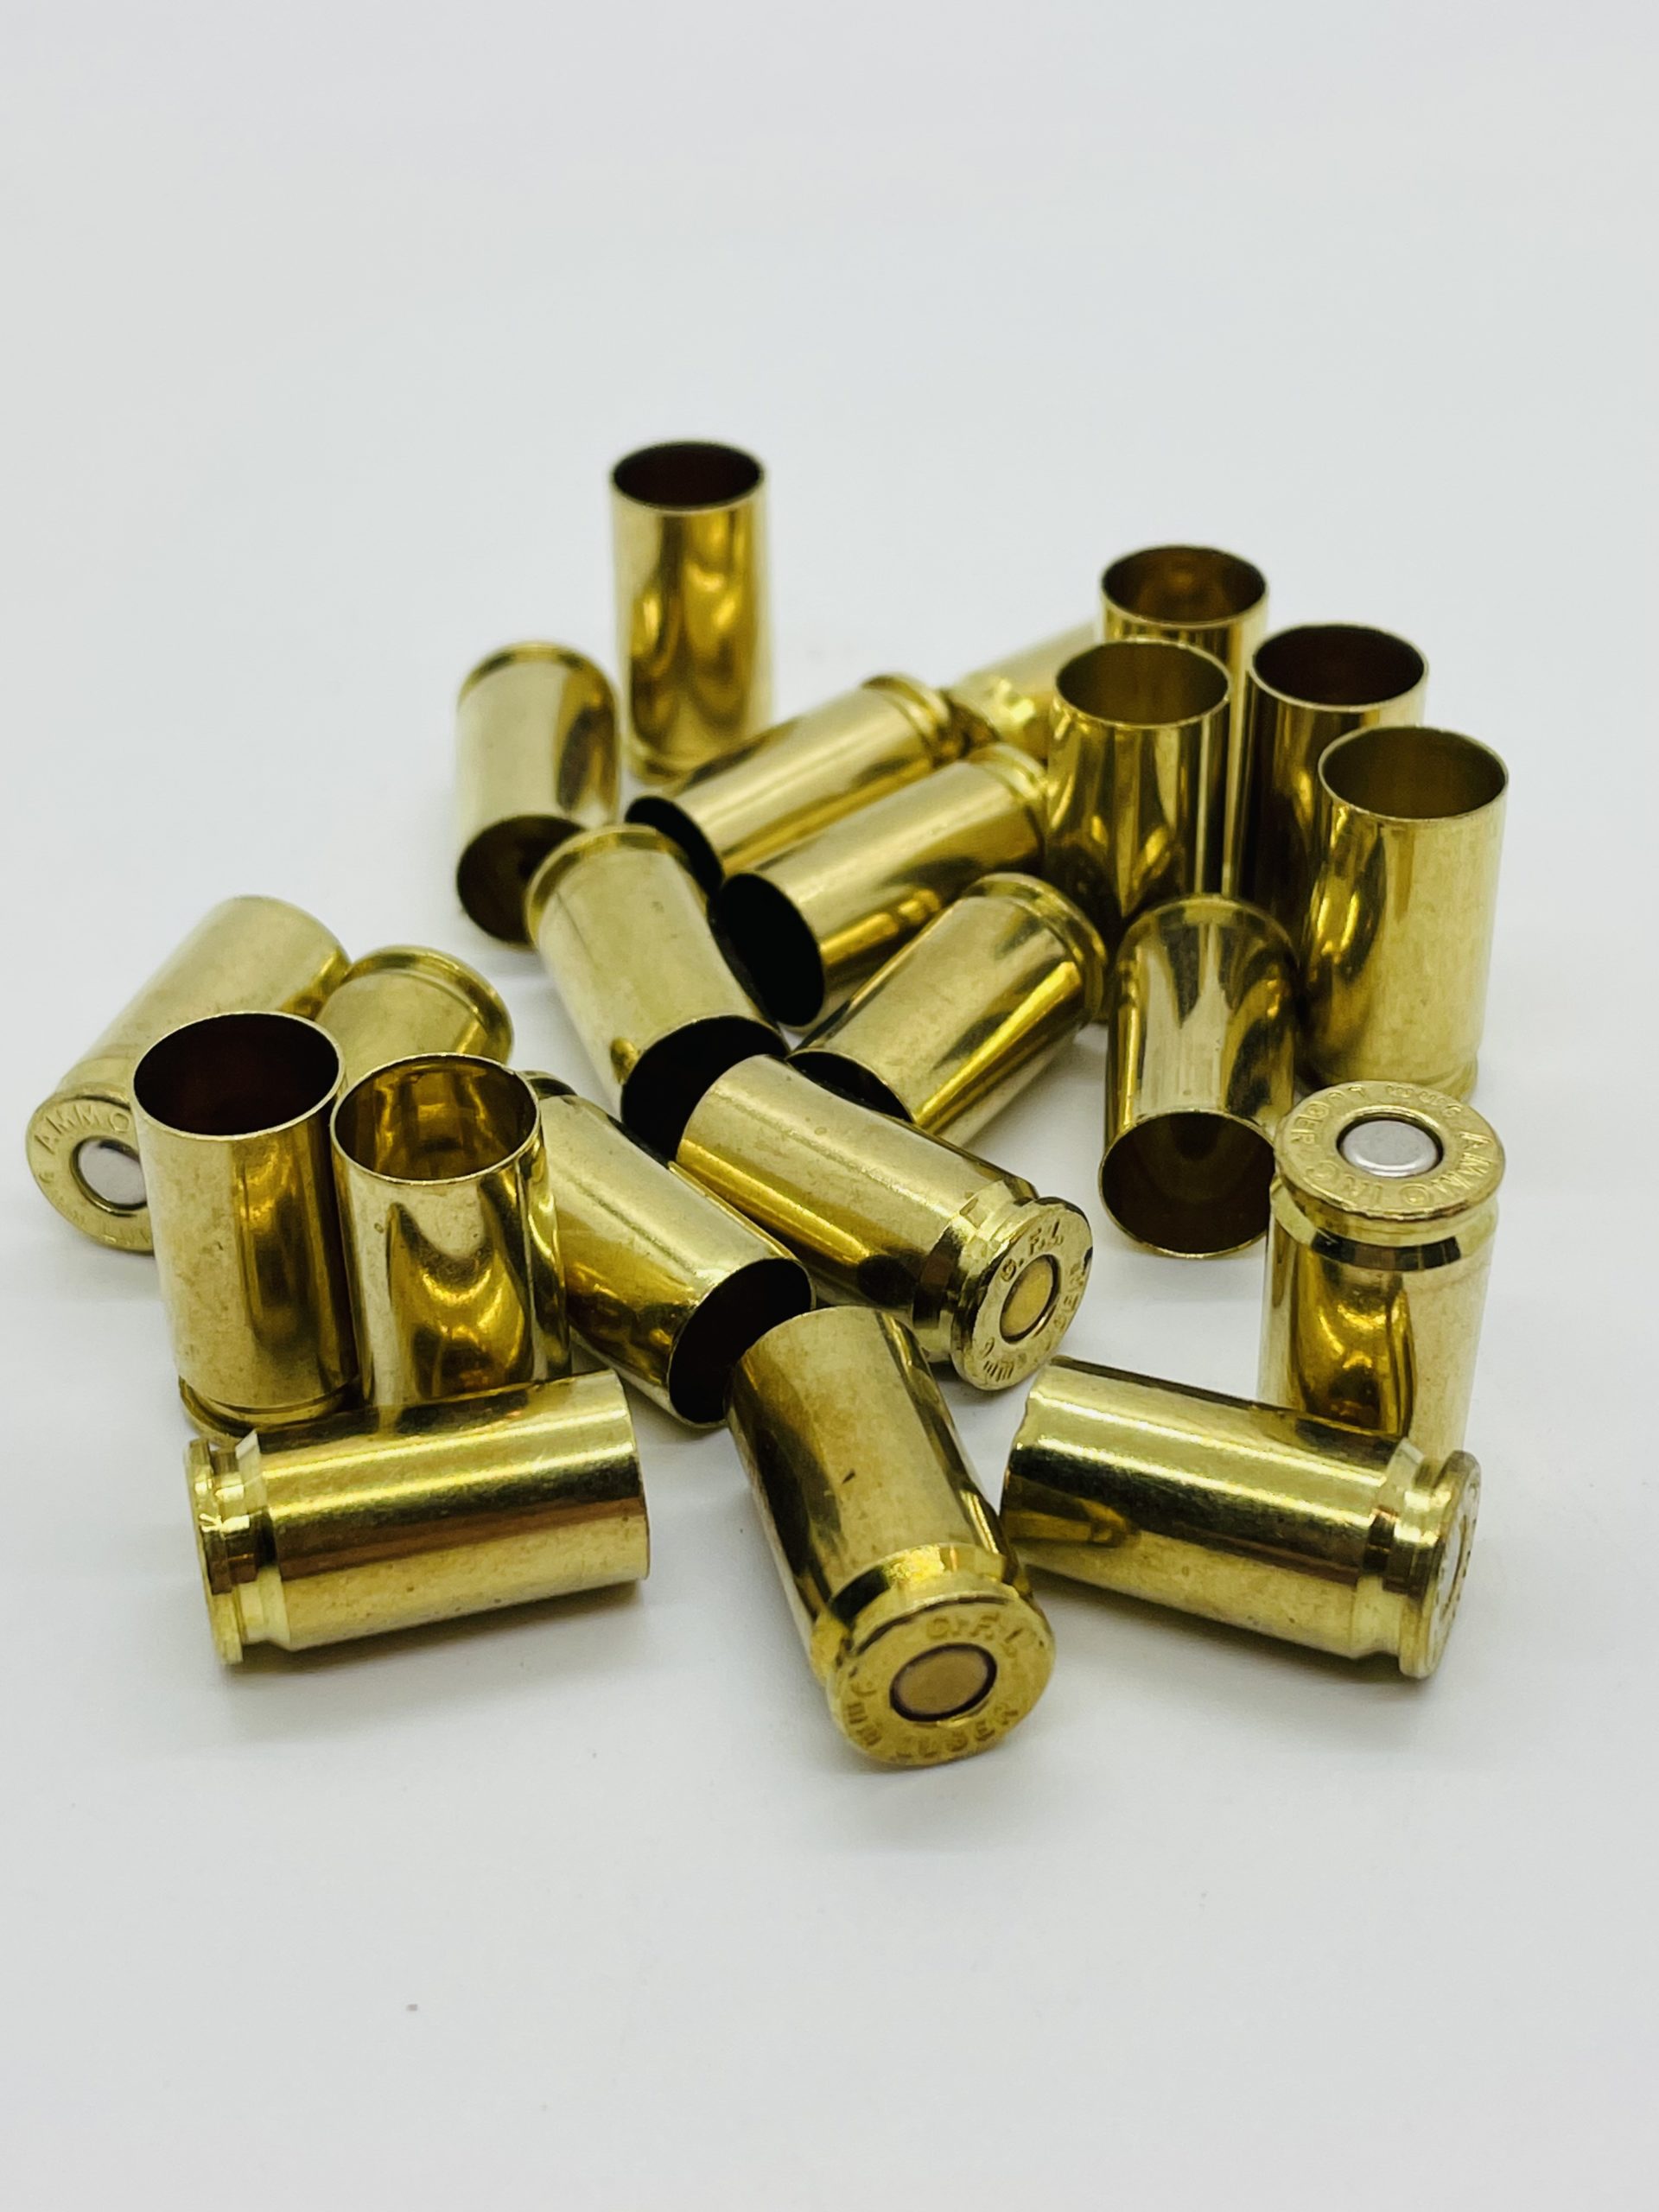 9mm primed Brass cases. 500 pack. Mixed Headstamps. - CDVS